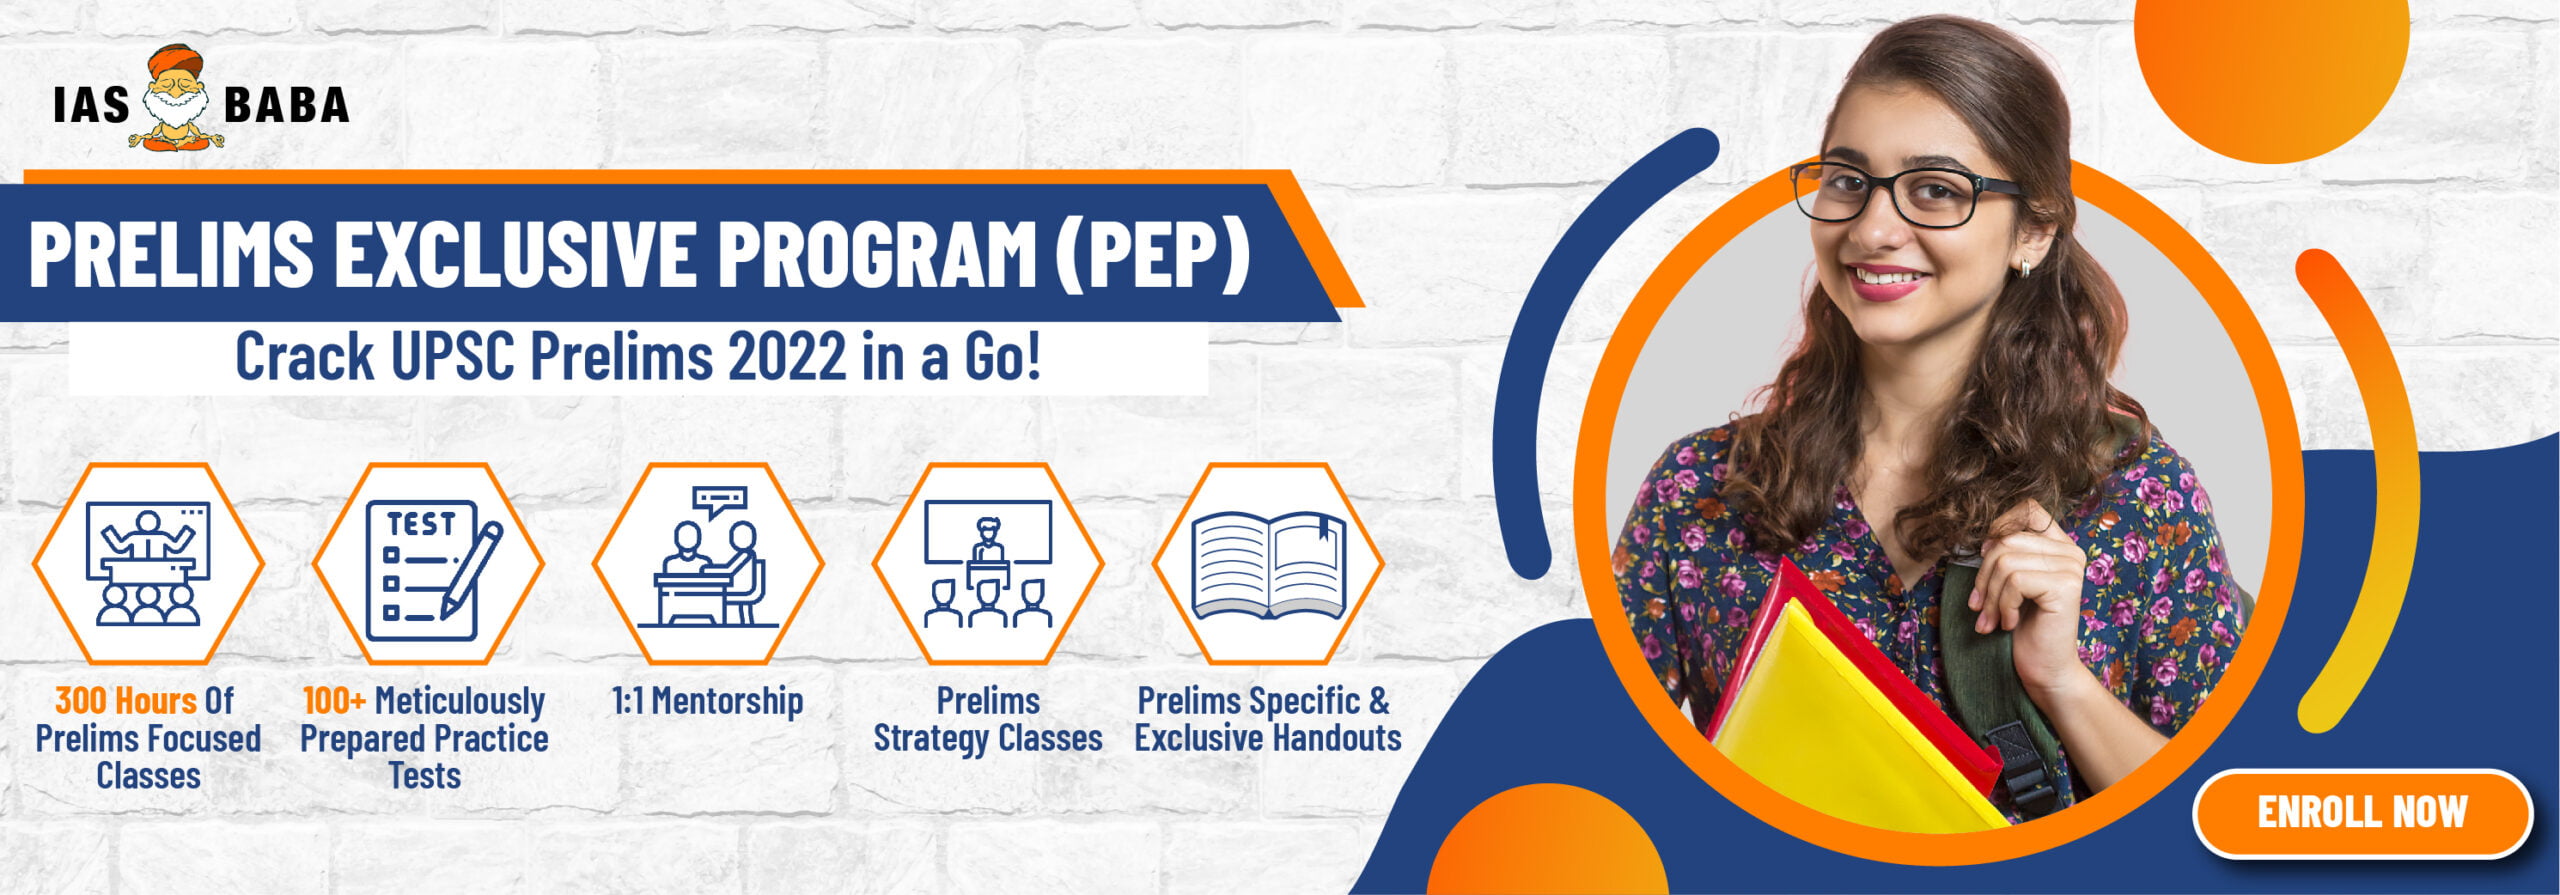 [ADMISSIONS OPEN] IASbaba’s Prelims Exclusive Programme (PEP) – Most Comprehensive Mentorship-Based Program for UPSC PRELIMS 2022!